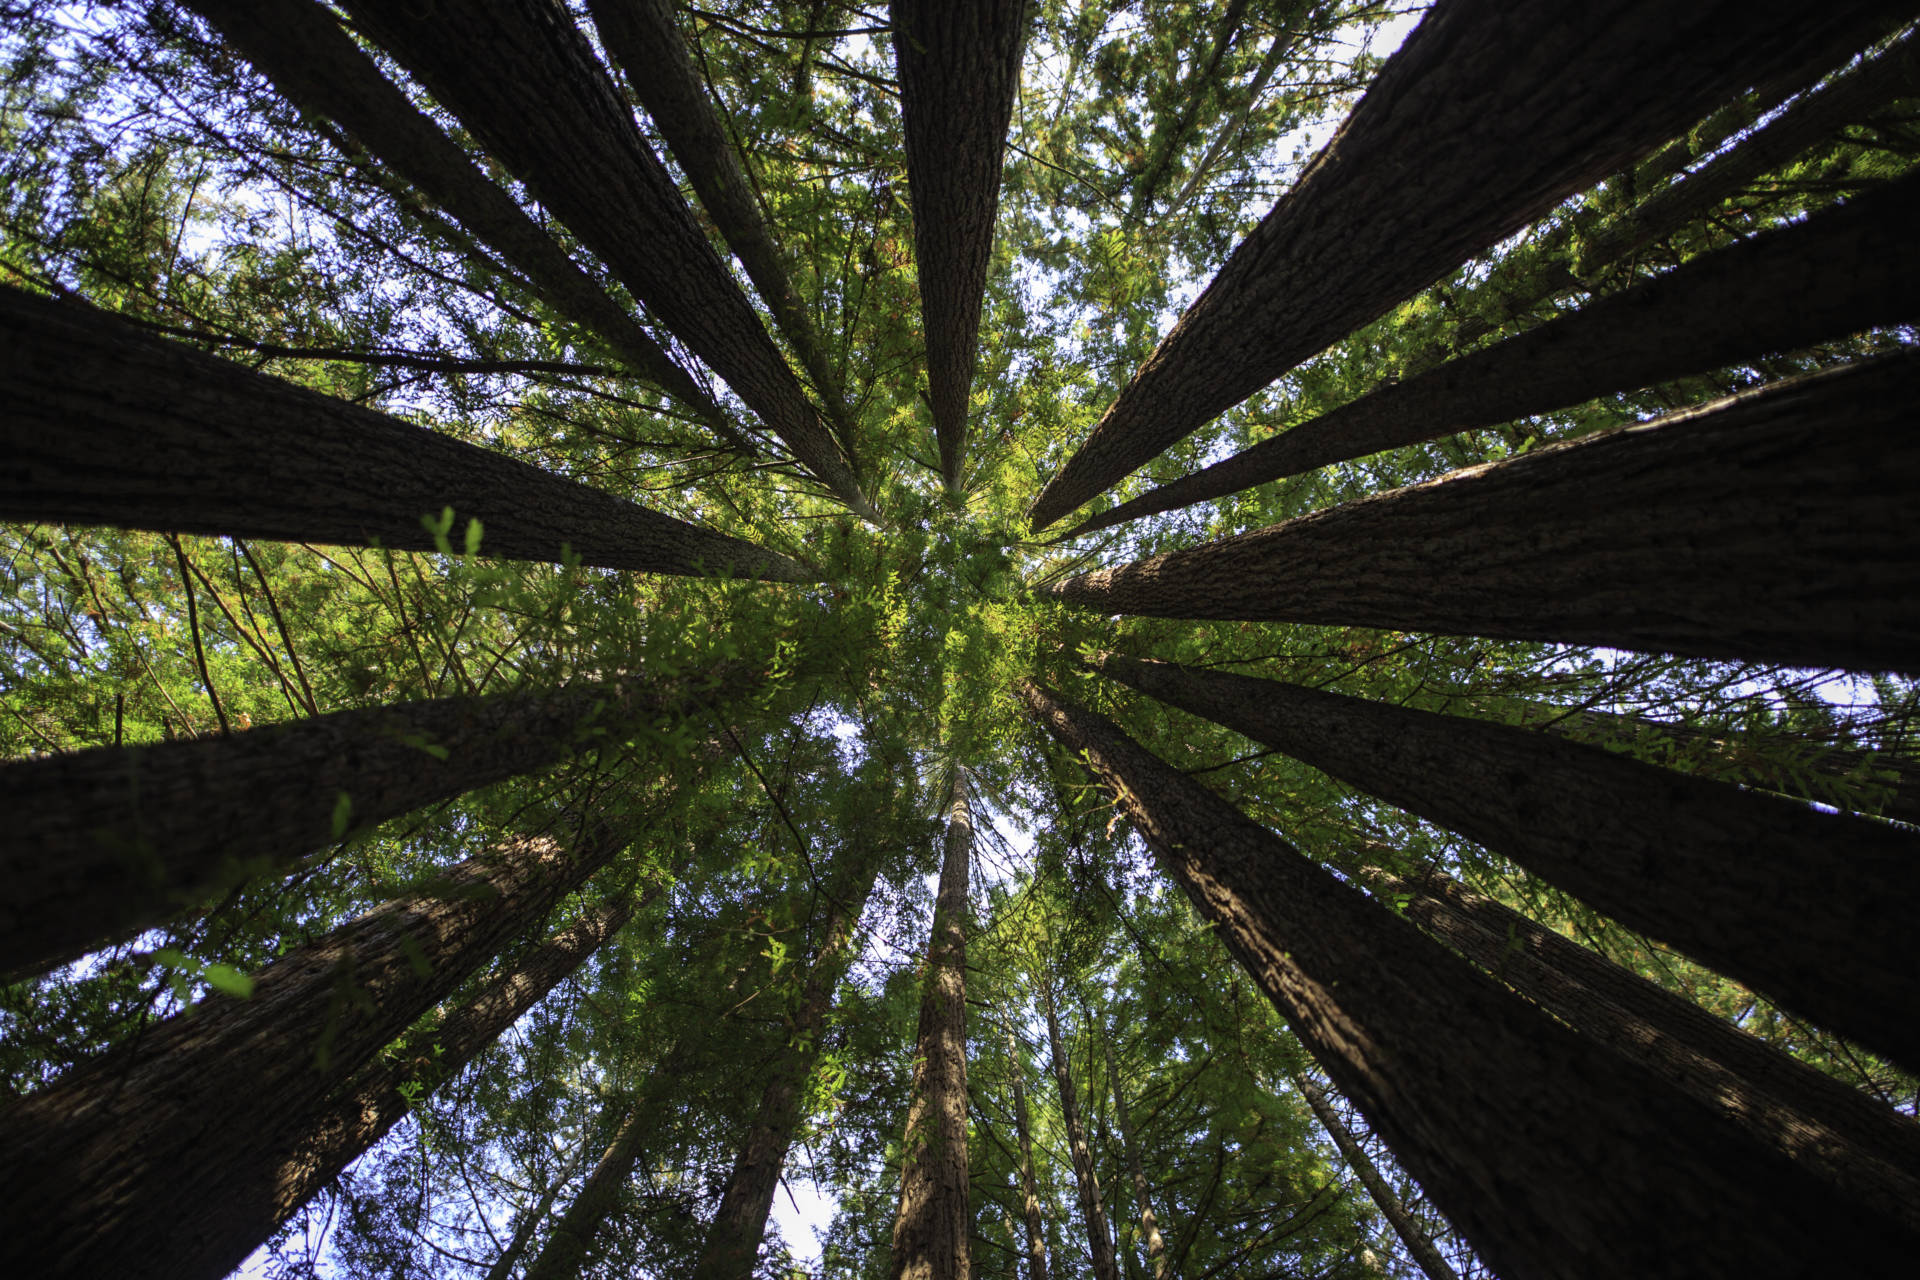 A picture taken in the middle of a circle of sequoia trees, looking up. iStock